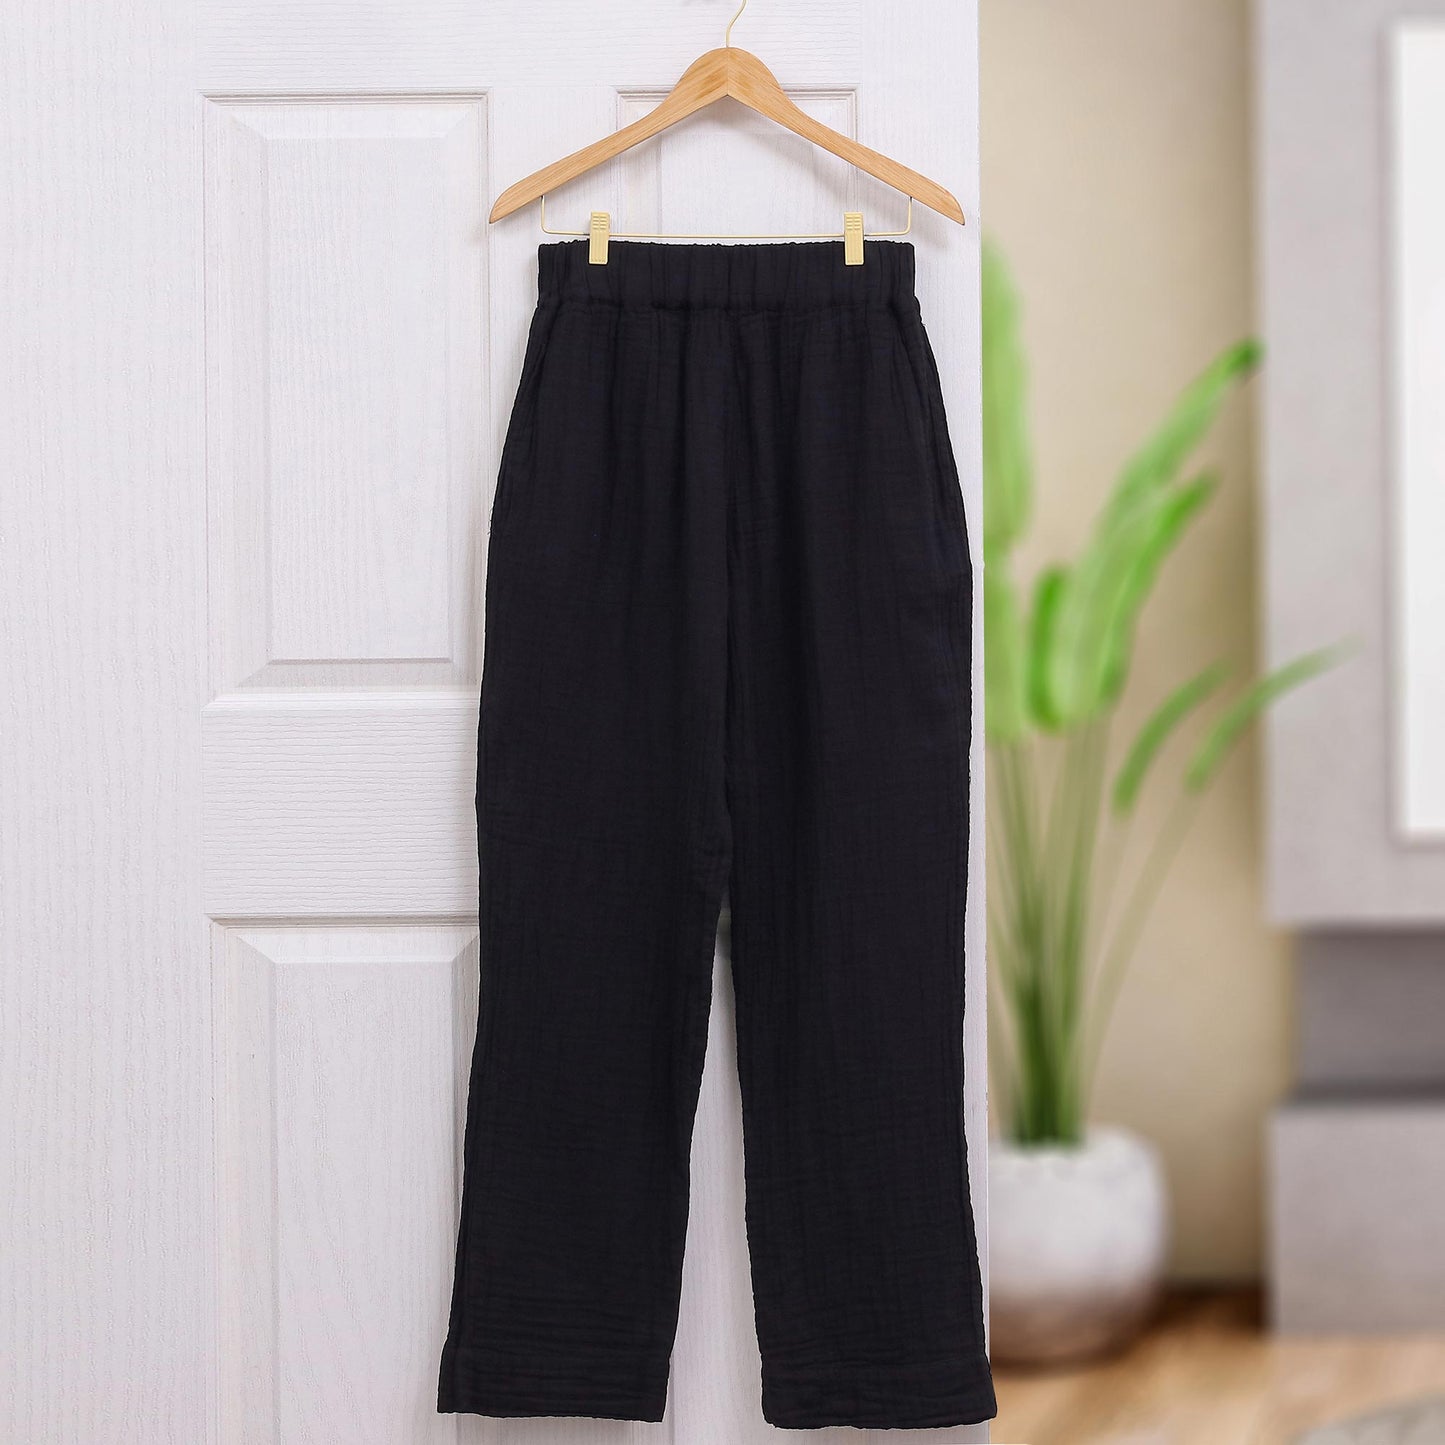 Cool Comfort  in Black Handcrafted Double Gauze Cotton Pants